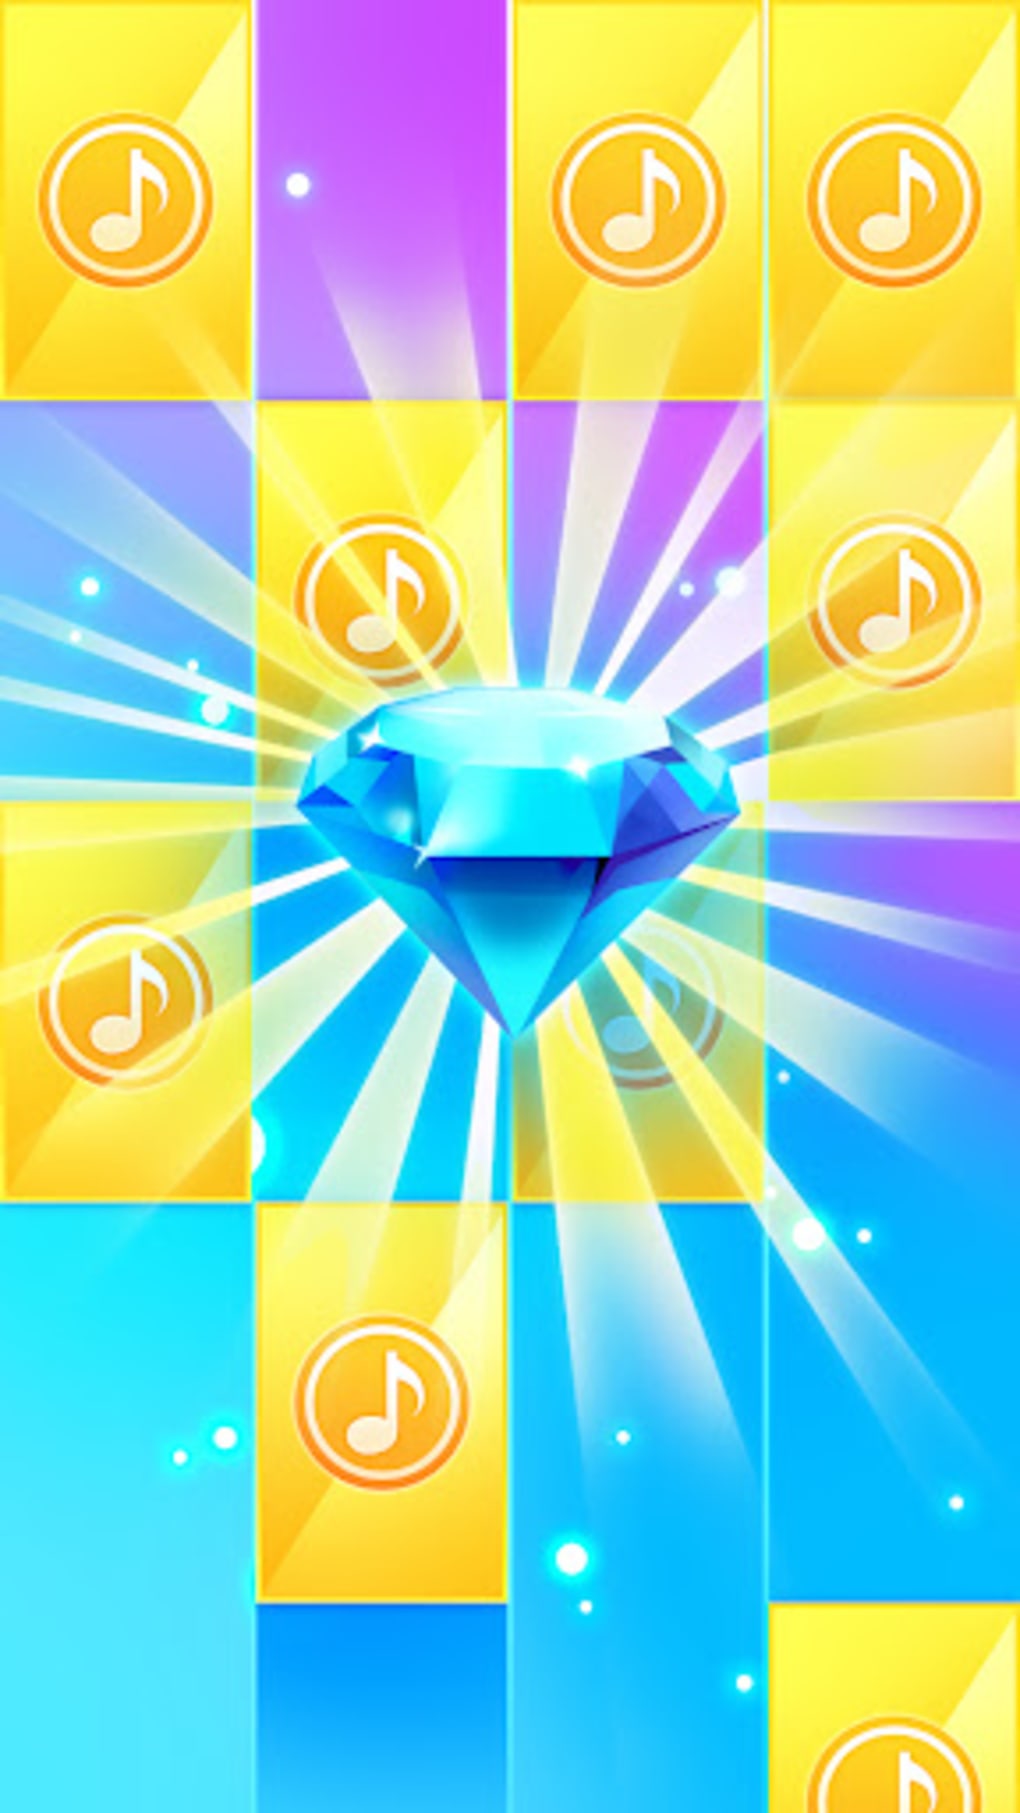 Piano Music Go-EDM Piano Games APK (Android Game) - Free Download